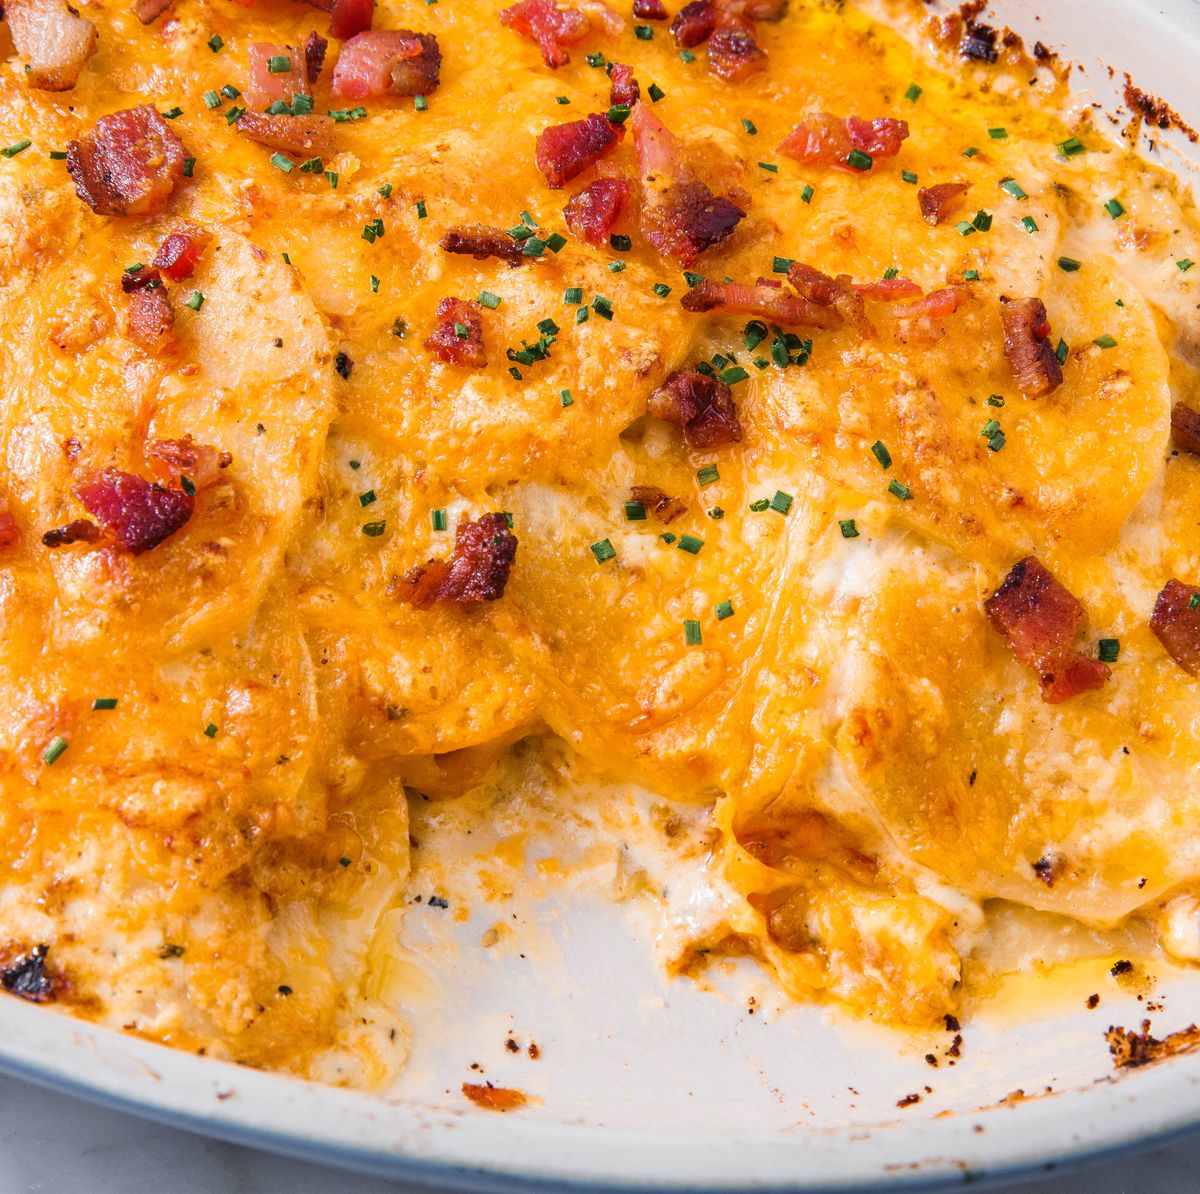 https://hips.hearstapps.com/hmg-prod/images/delish-loaded-scalloped-potatoes-107-1541801727.jpg?crop=0.670xw:1.00xh;0.167xw,0&resize=1200:*